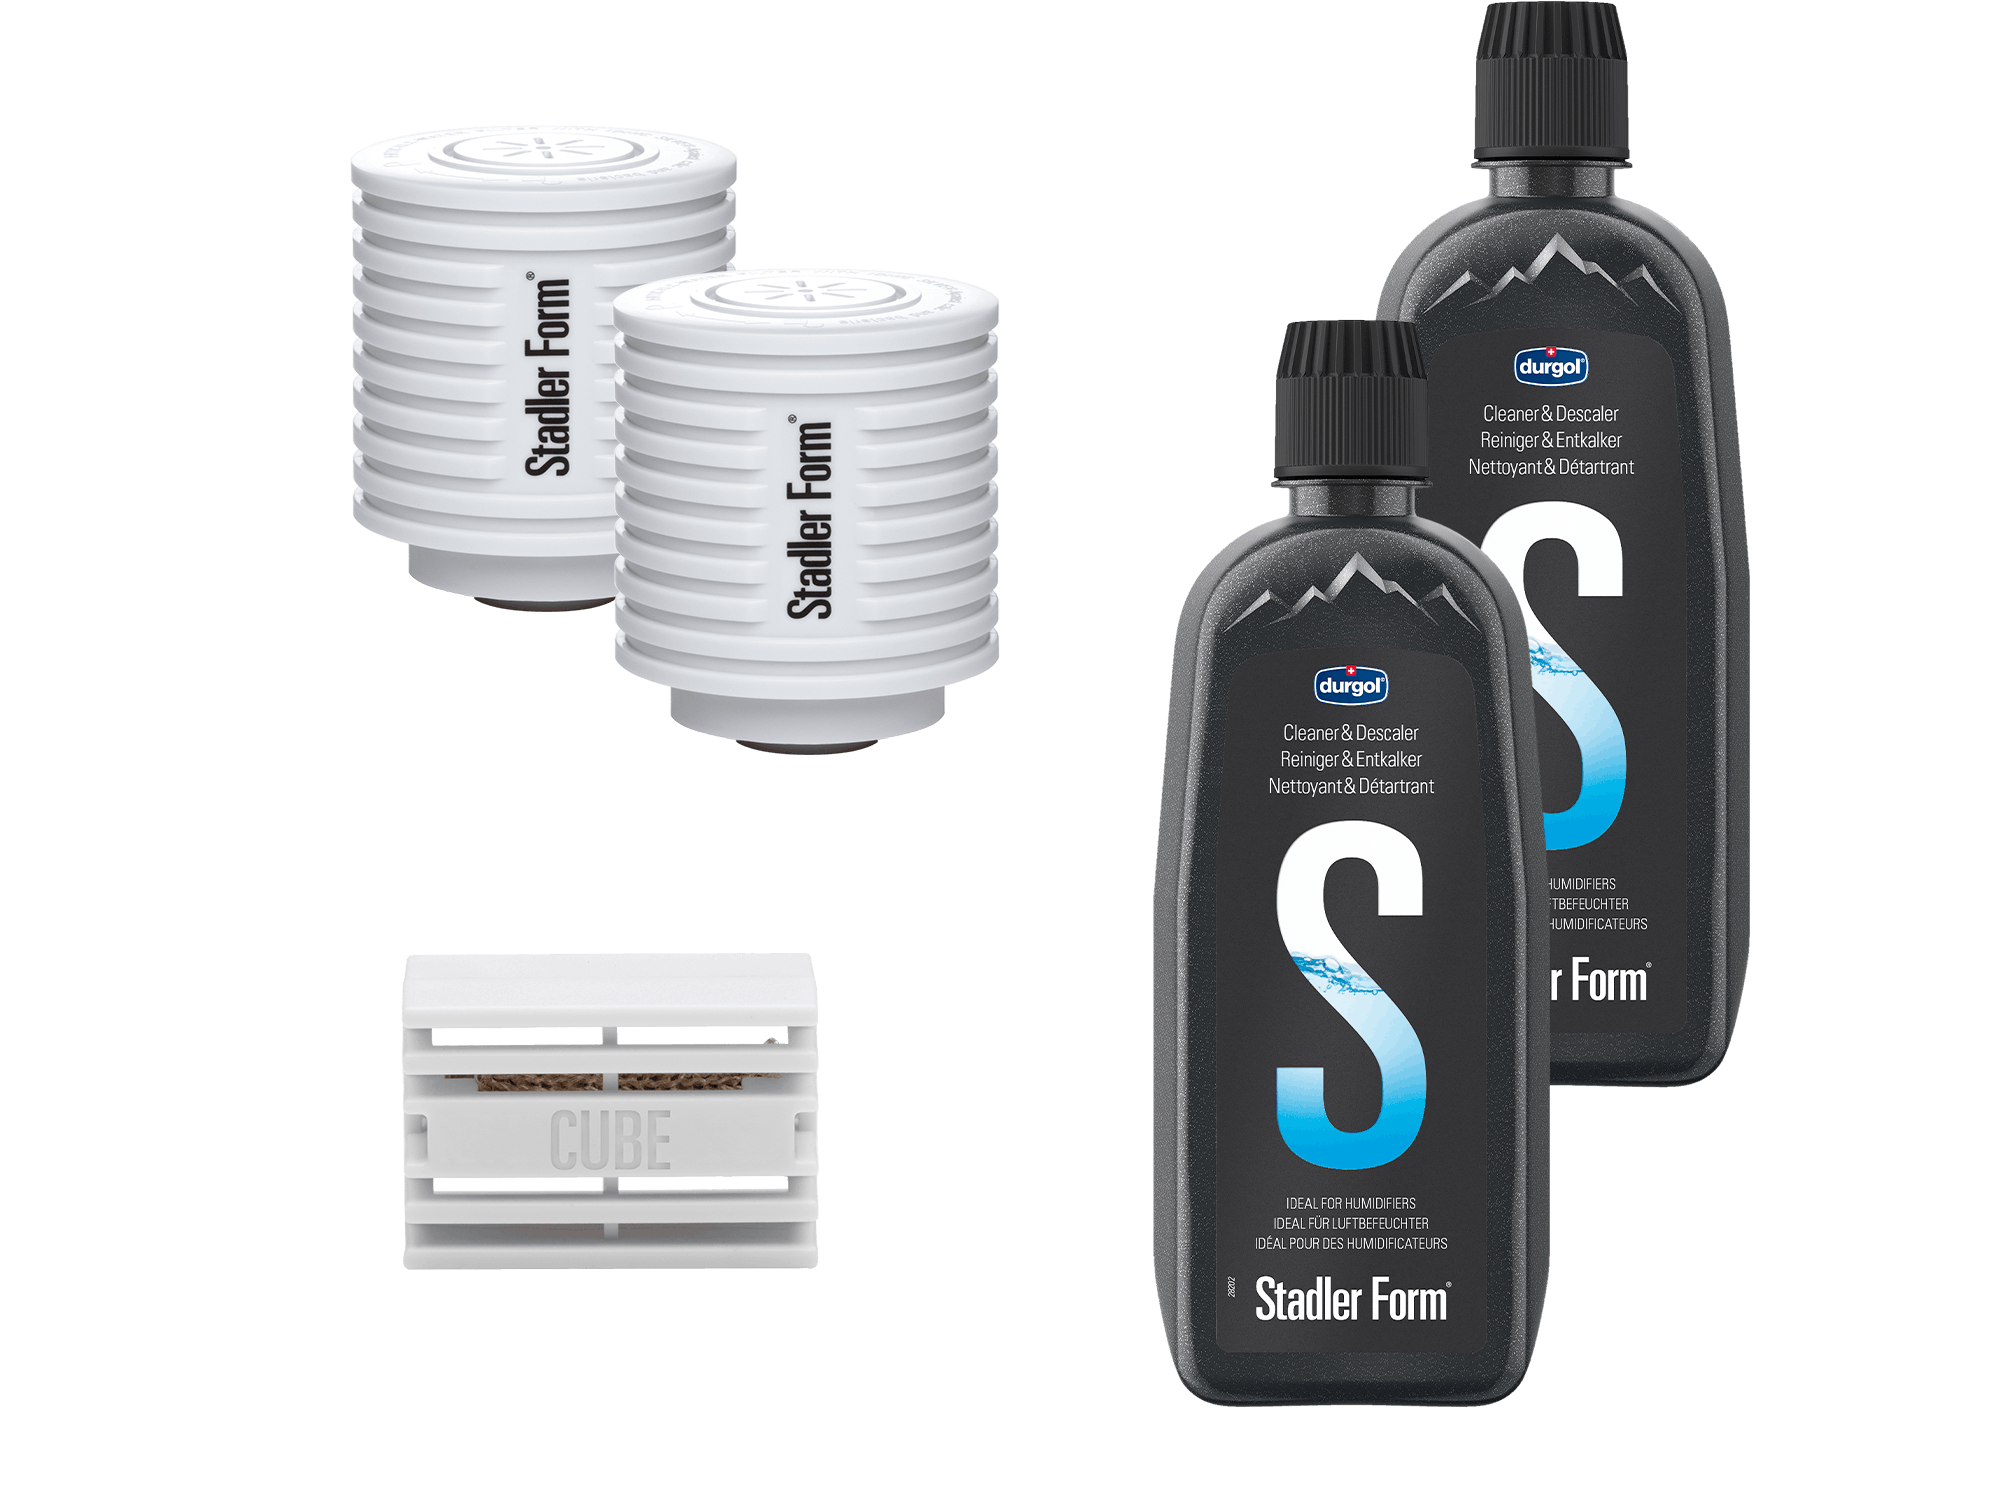 Accessories pack by Stadler Form for ultrasonic humidifiers and air washers